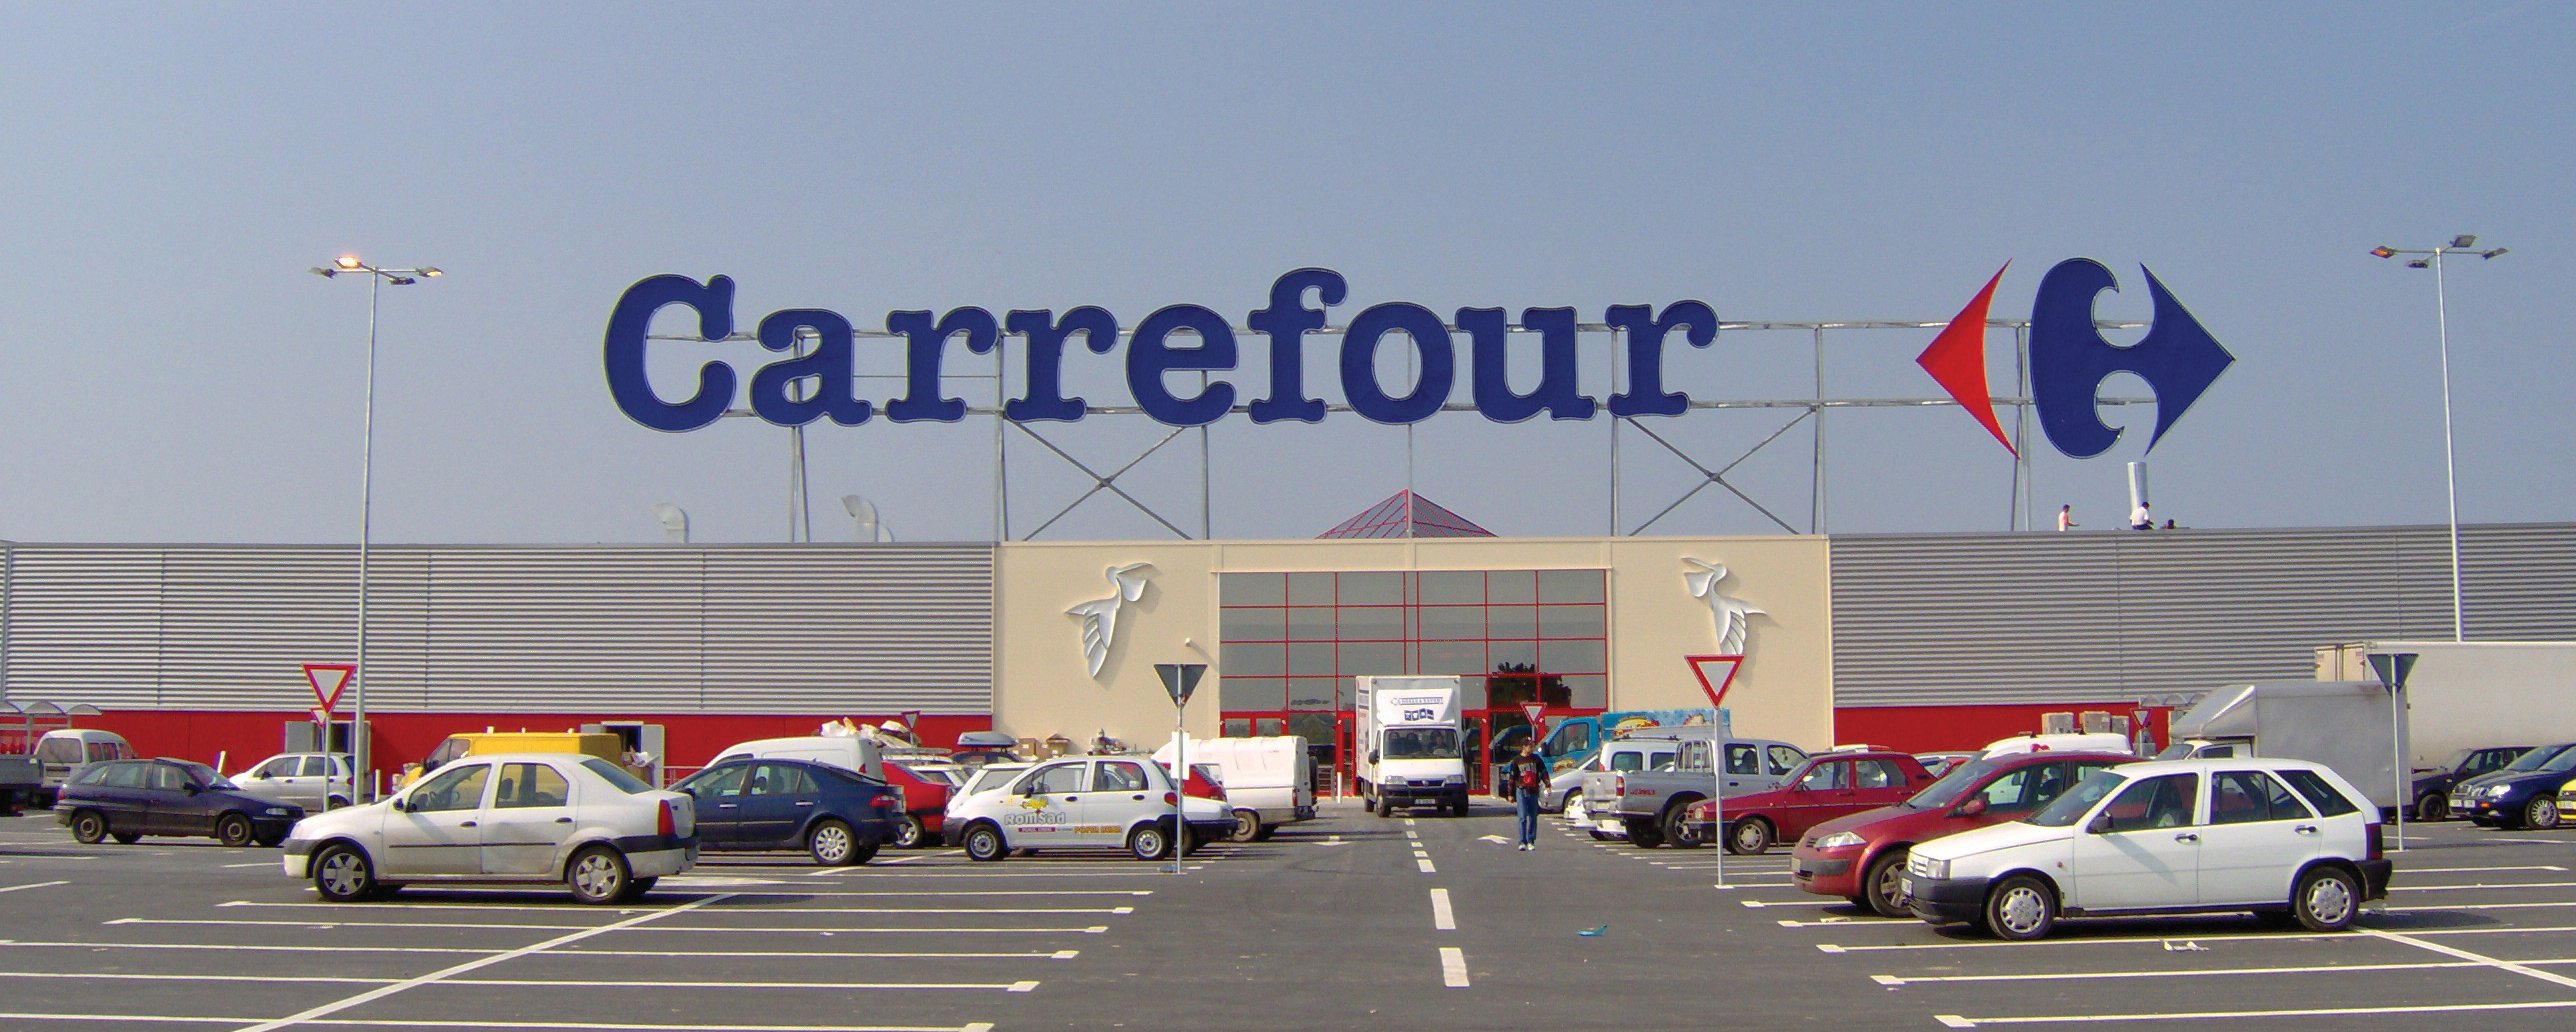 CARREFOUR SHOPPING MALLS